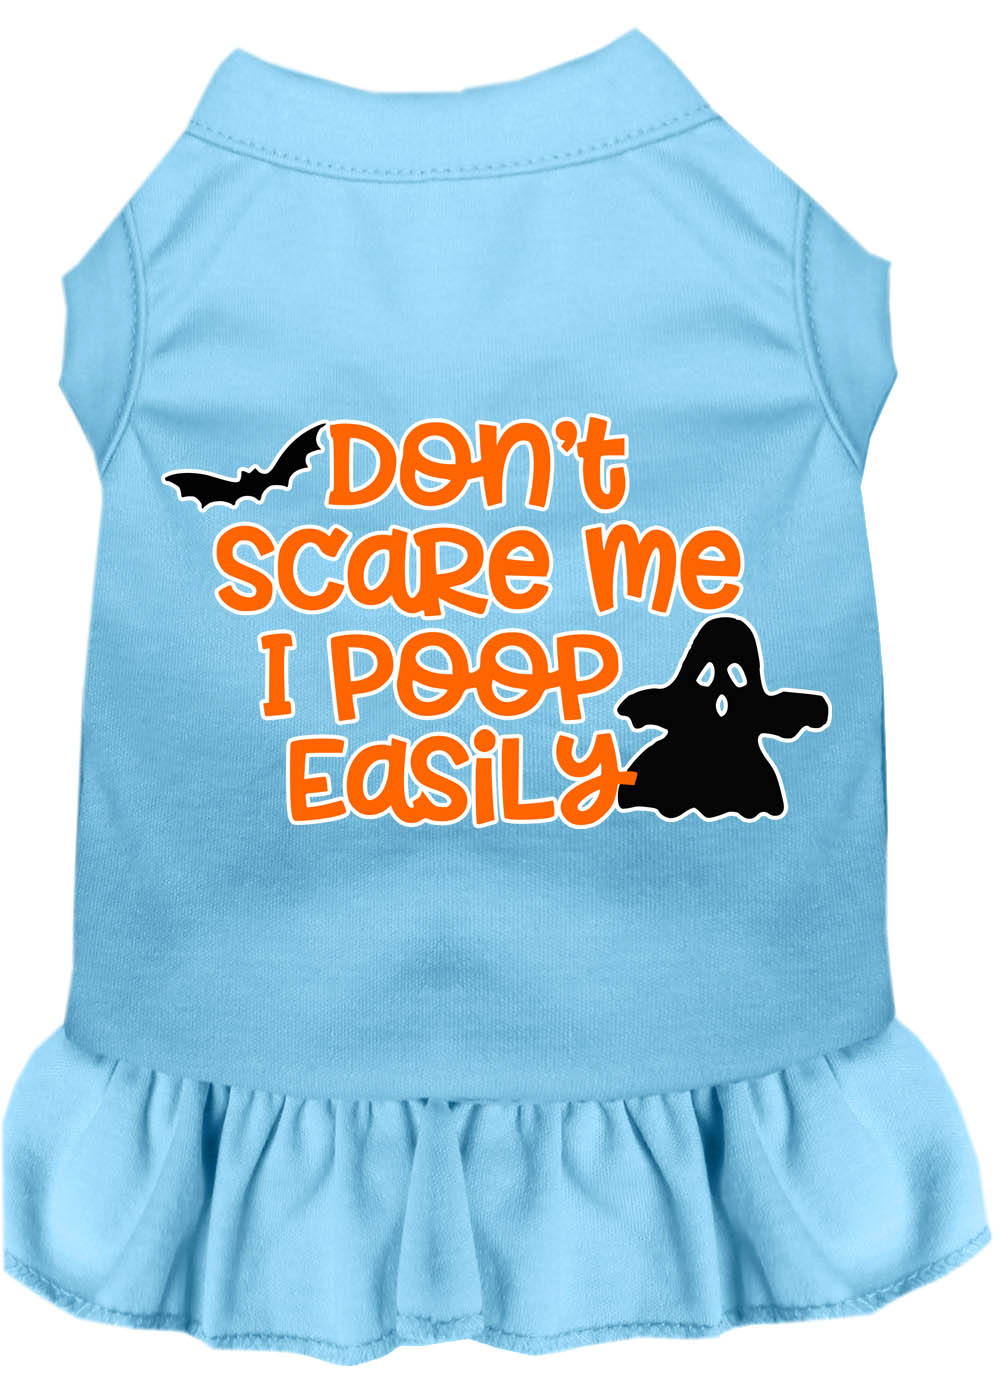 Don't Scare Me, Poops Easily Screen Print Dog Dress Baby Blue Lg